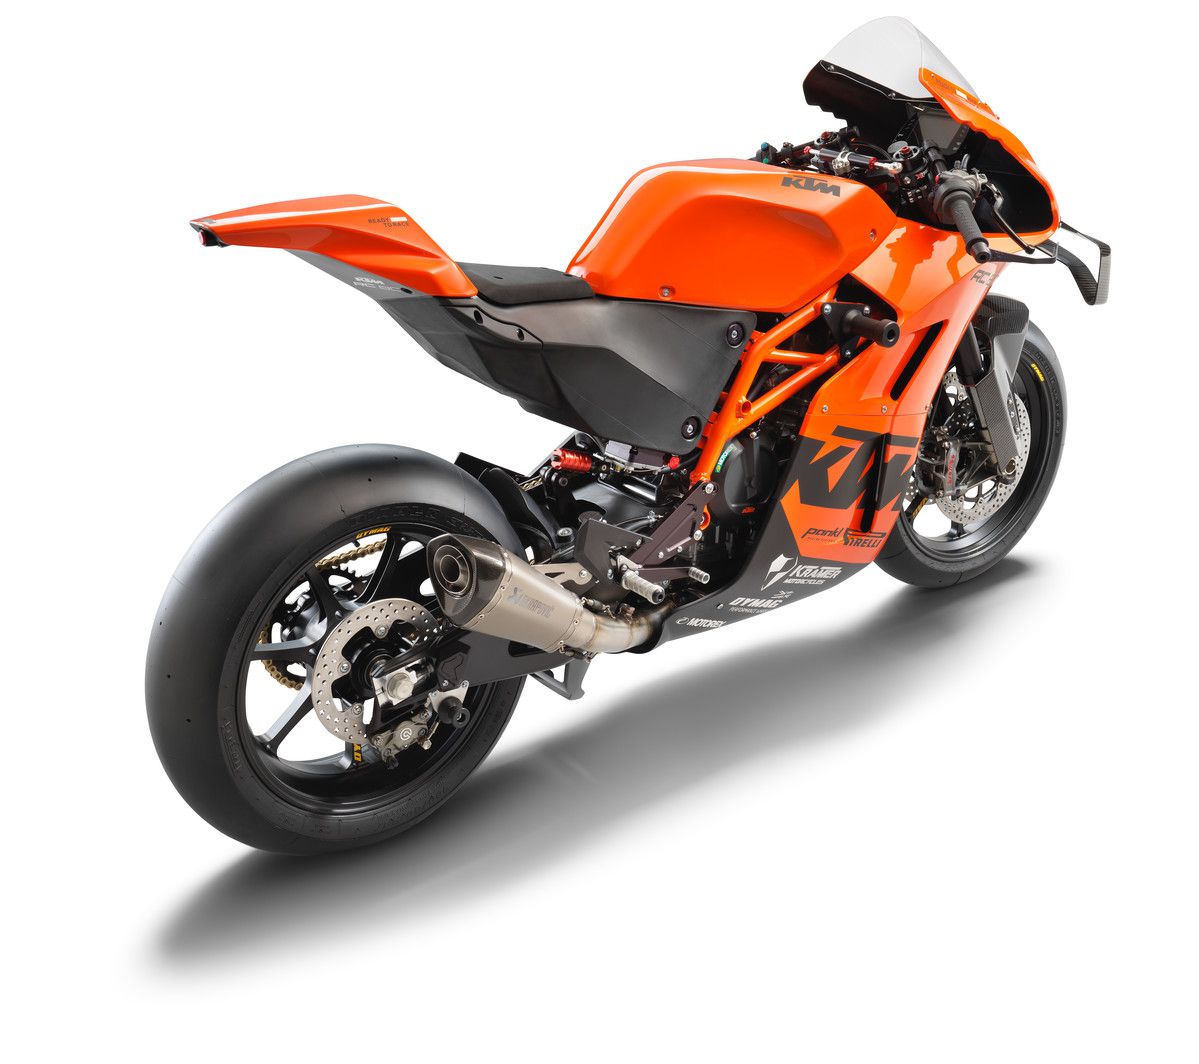 Slim and lightweight, the RC 8C promises to be a ripper.